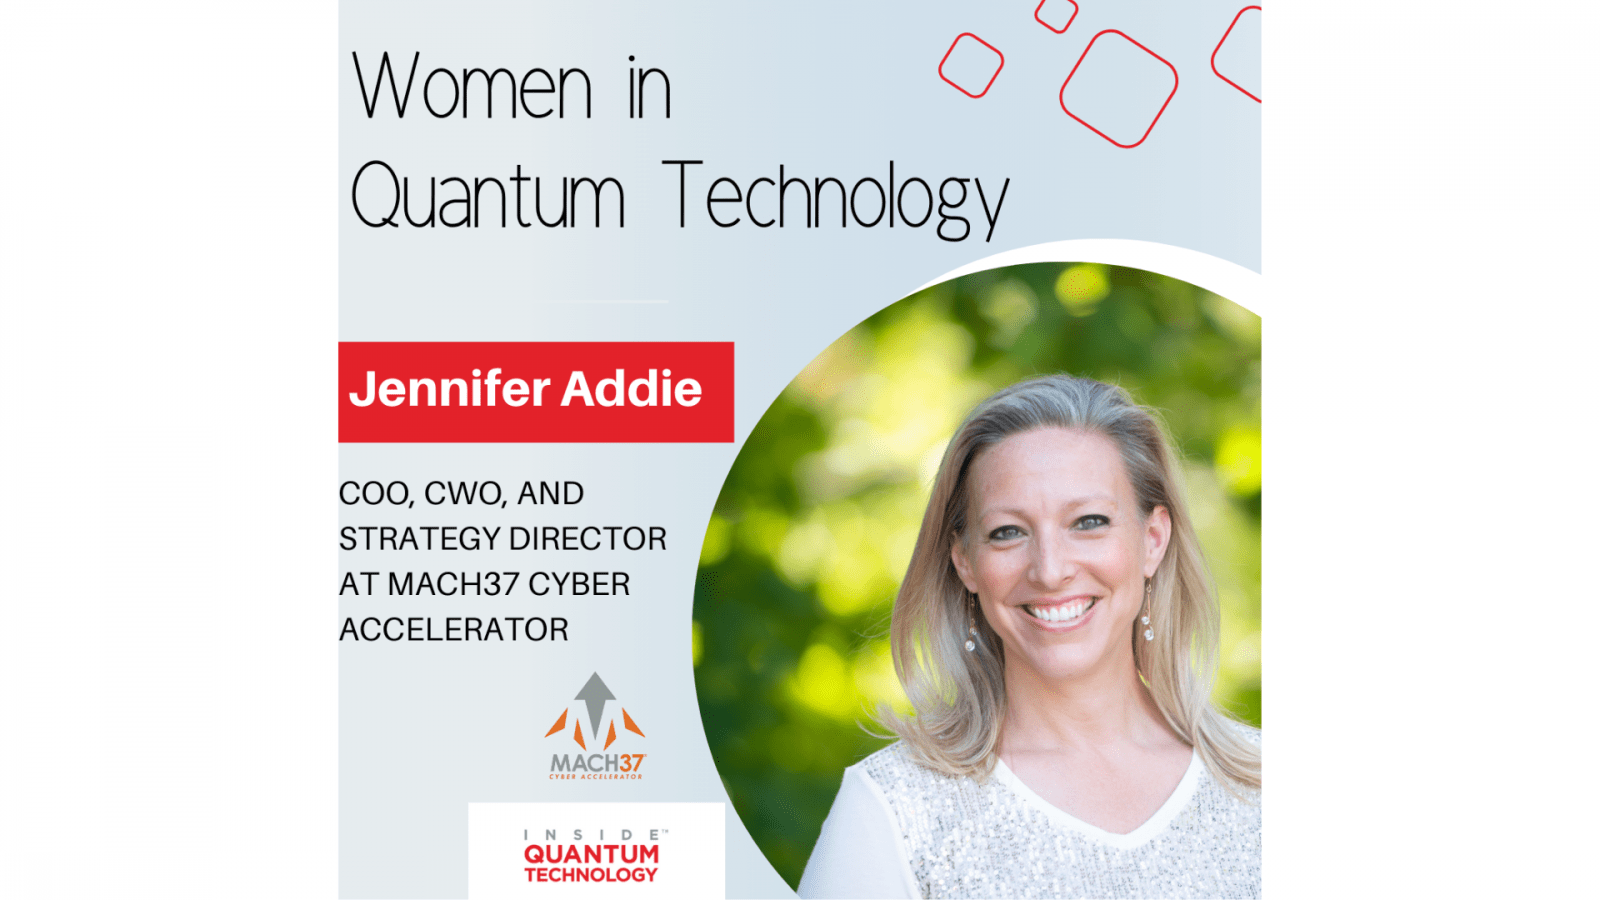 Jennifer Addie, COO, CWO and Strategy Director at MACH37 Cyber Accelerator discusses her journey into the quantum industry.